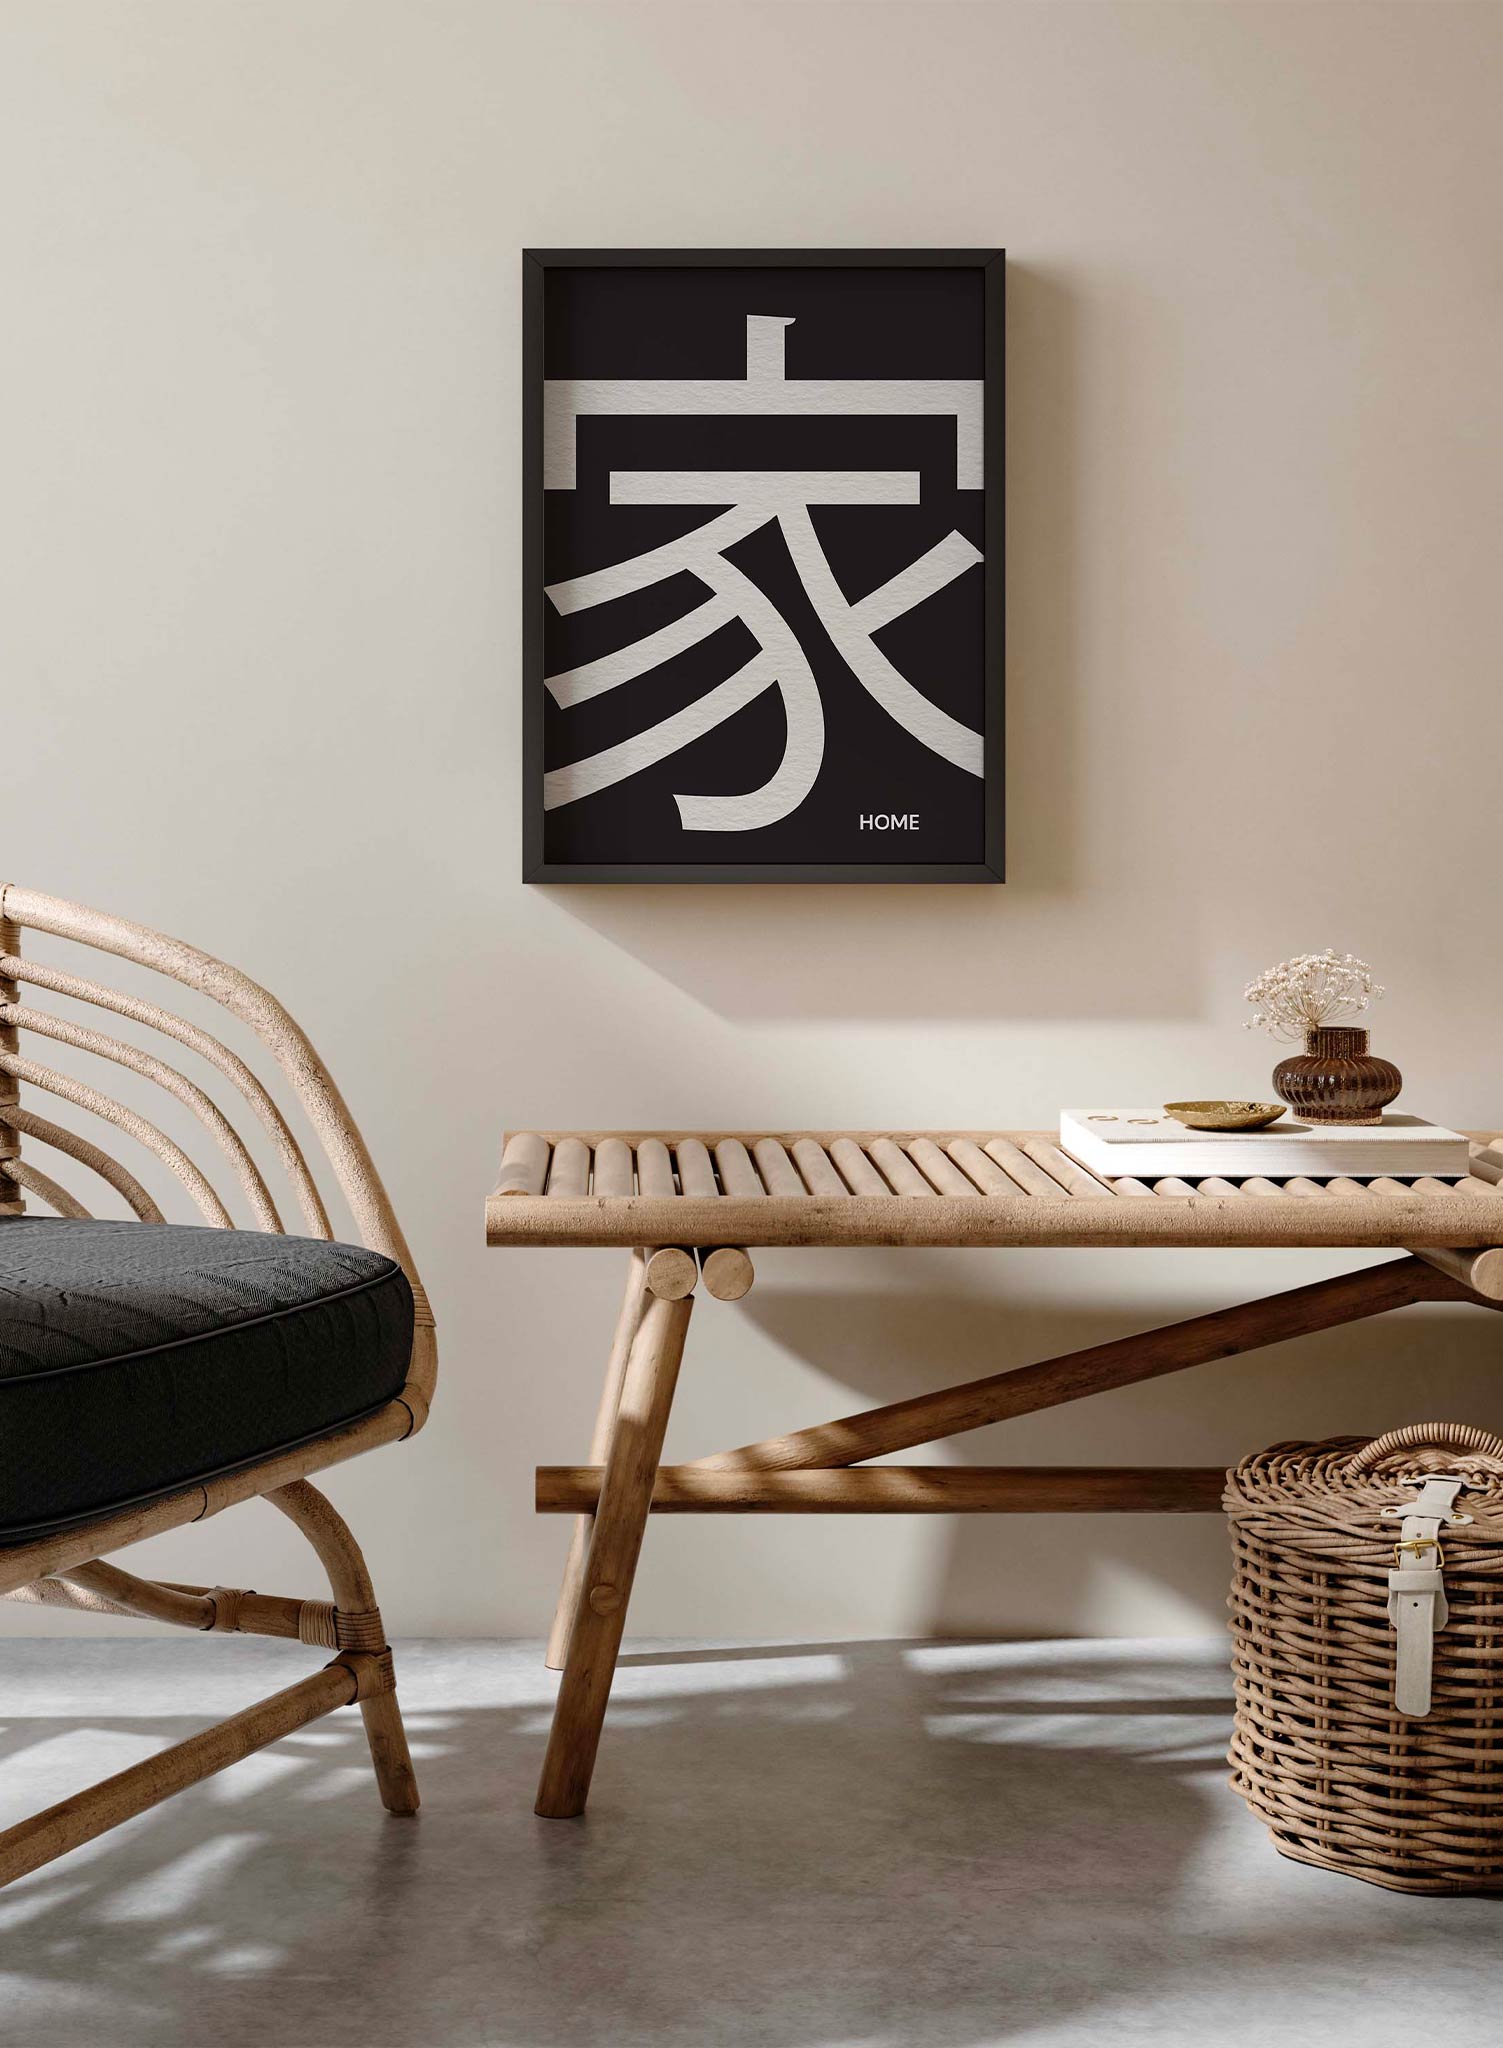 Uchi is a minimalist typography by Opposite Wall of the word "Home" written in Japanese.